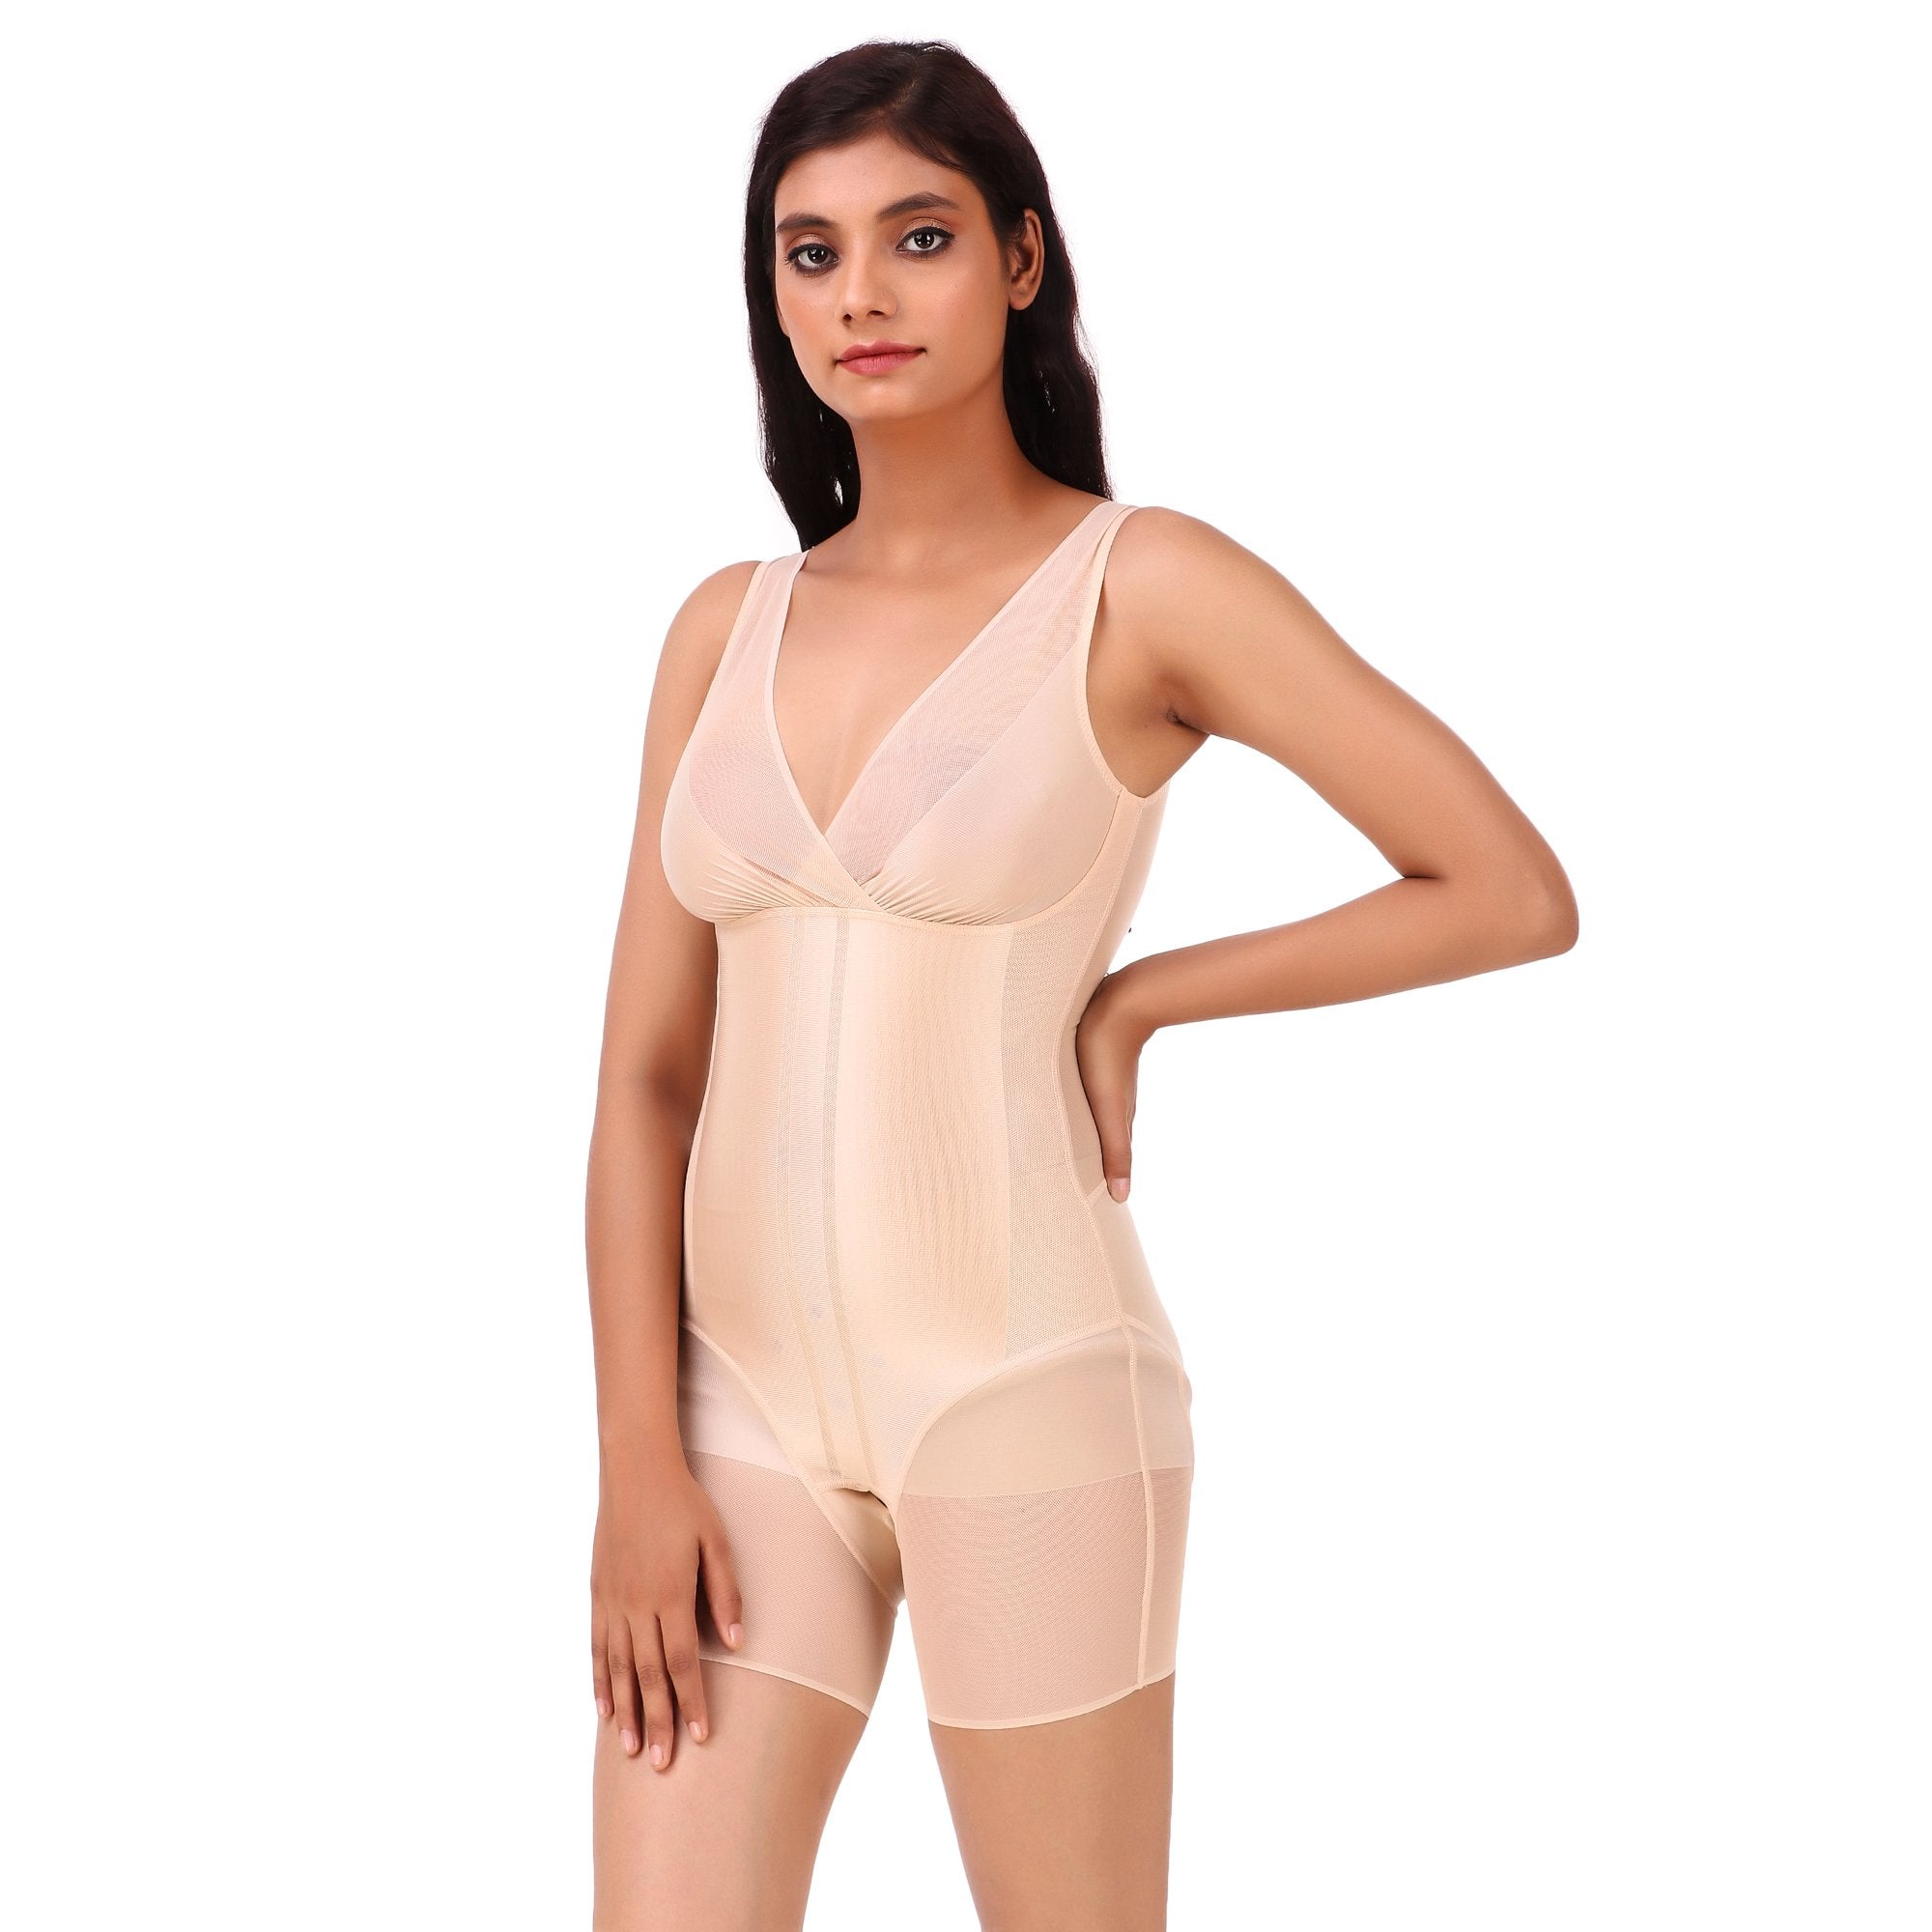 AXTZH-XCORSET3321 Laser-Cut No-Panty Lines High Compression Body Suit